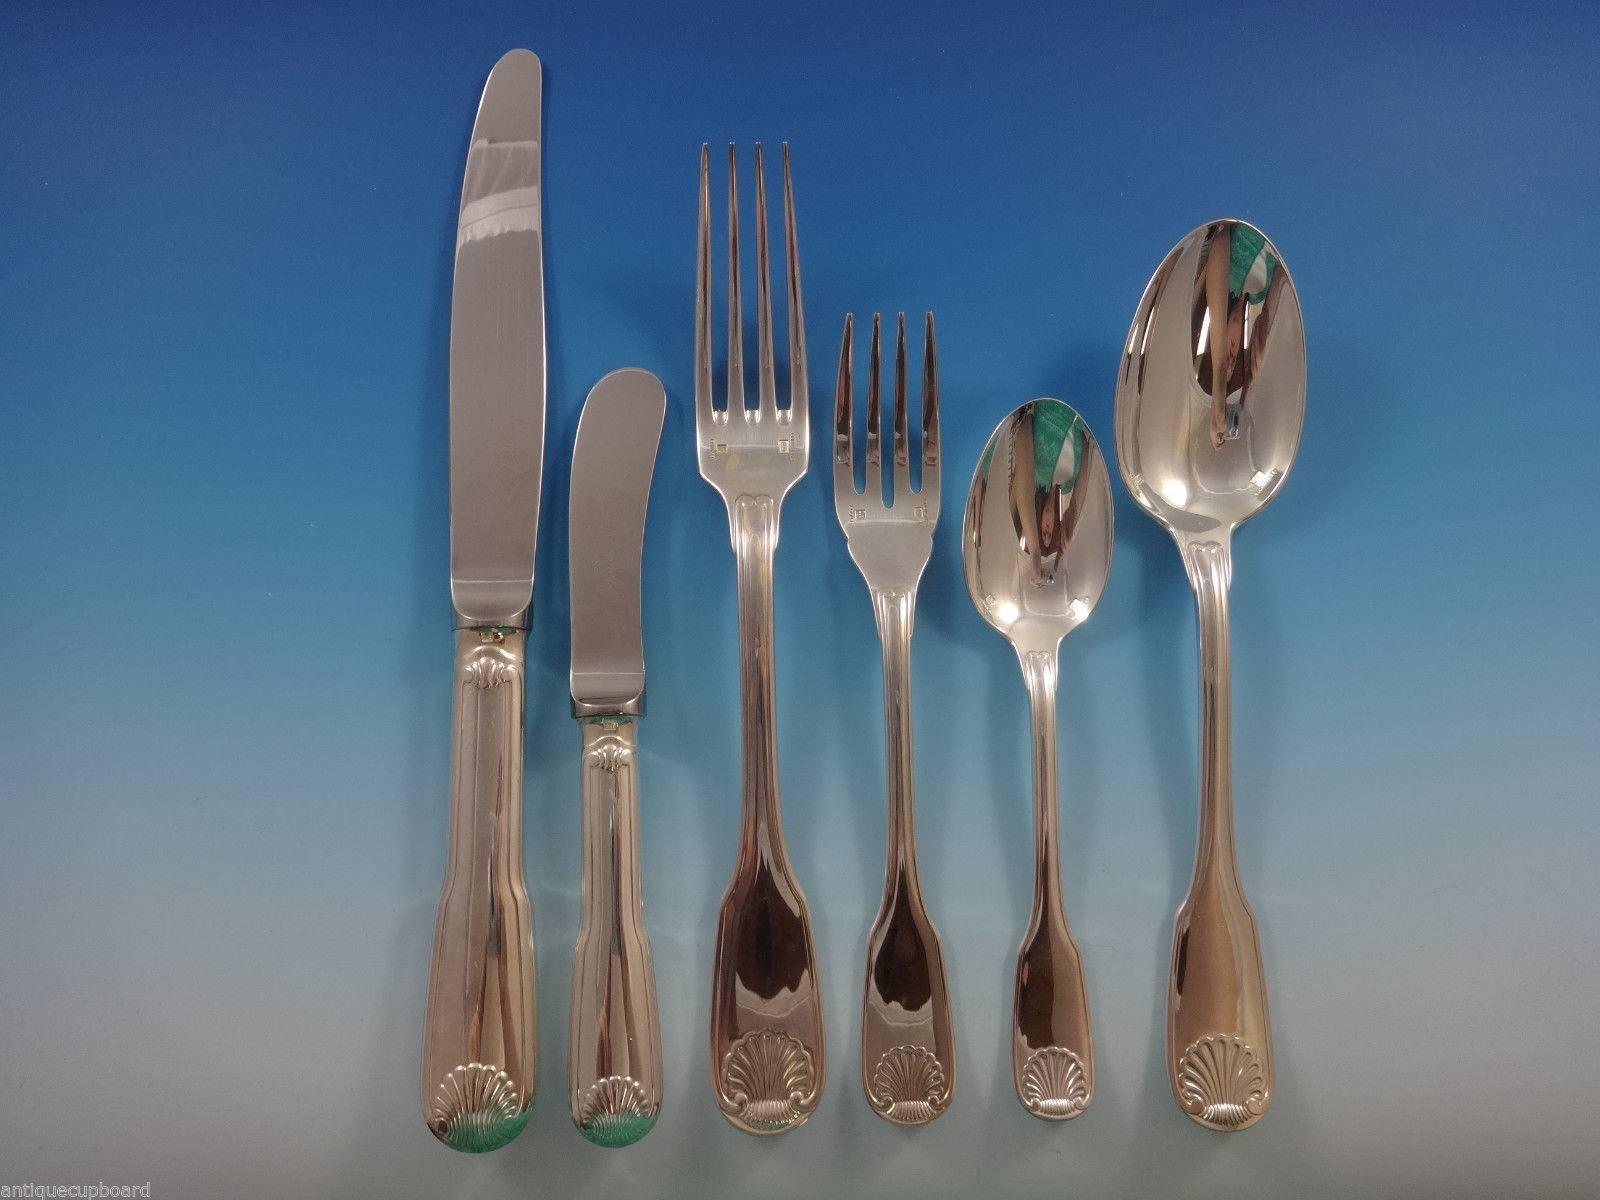 Christofle set,
Estate Vendome Aka Arcantia by Christofle (France) silver plated flatware set - 81 pieces. This set includes:

12 dinner size knives, 9 5/8